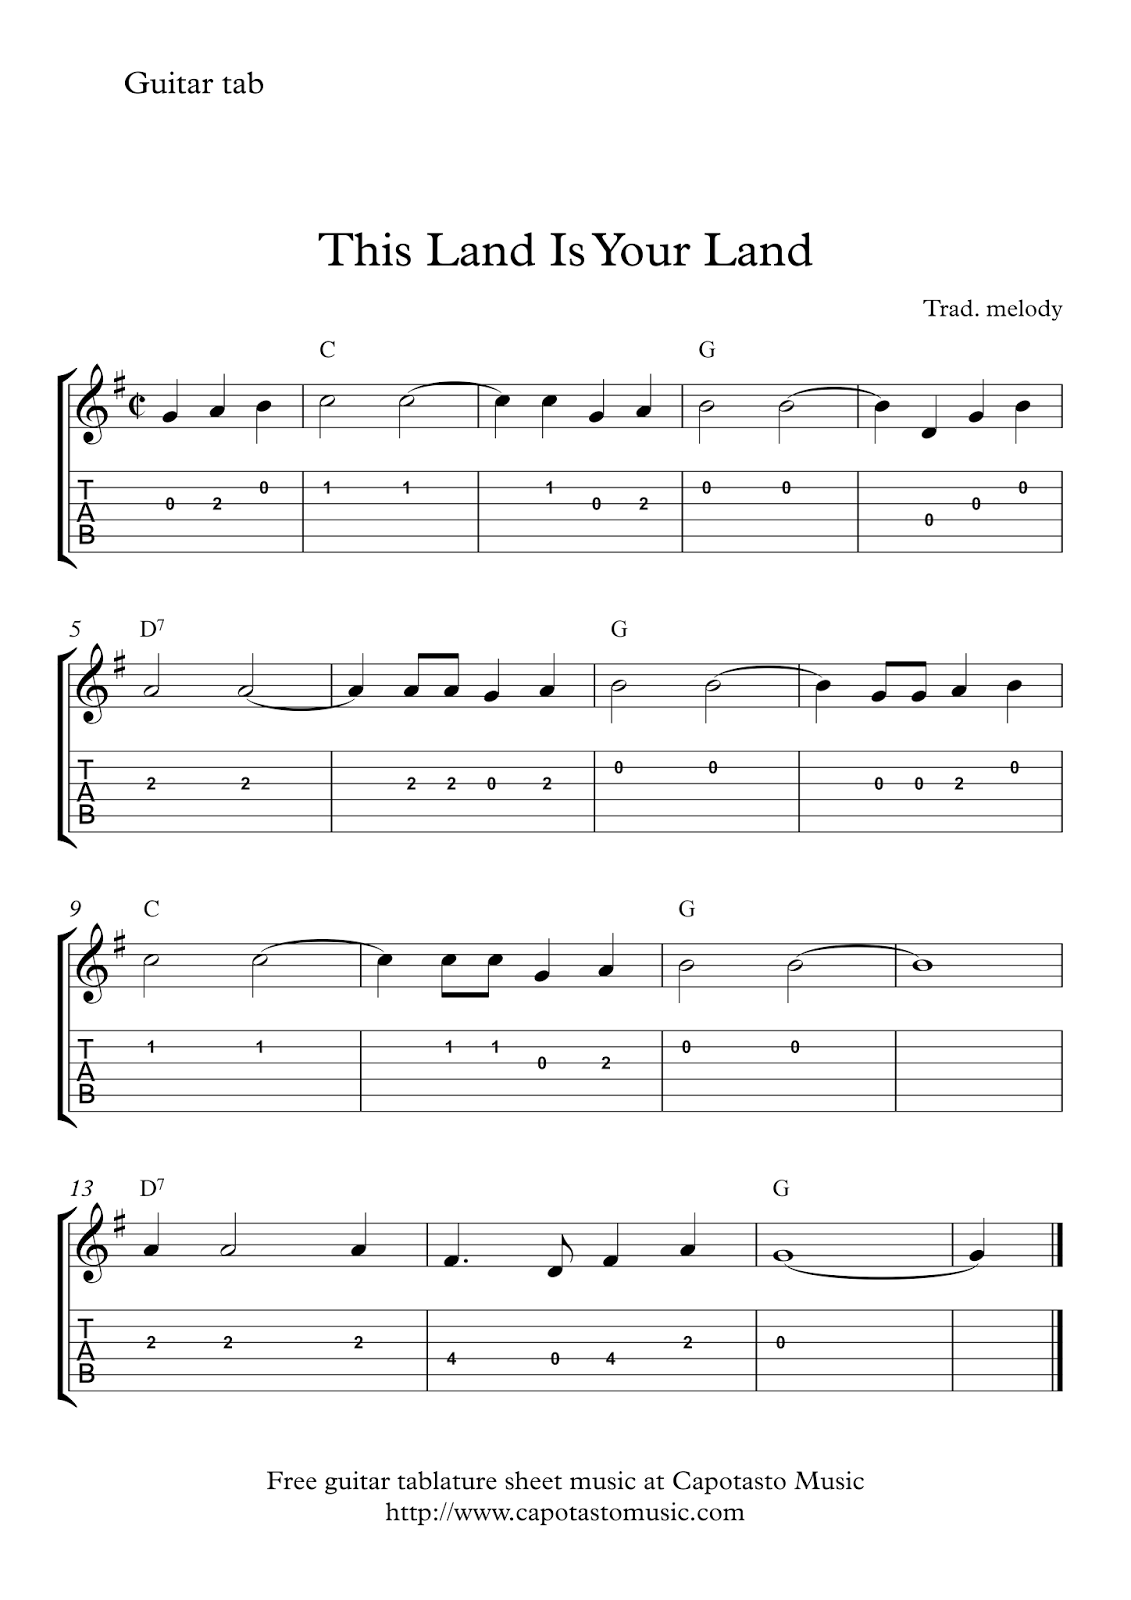 free-easy-guitar-tablature-sheet-music-this-land-is-your-land